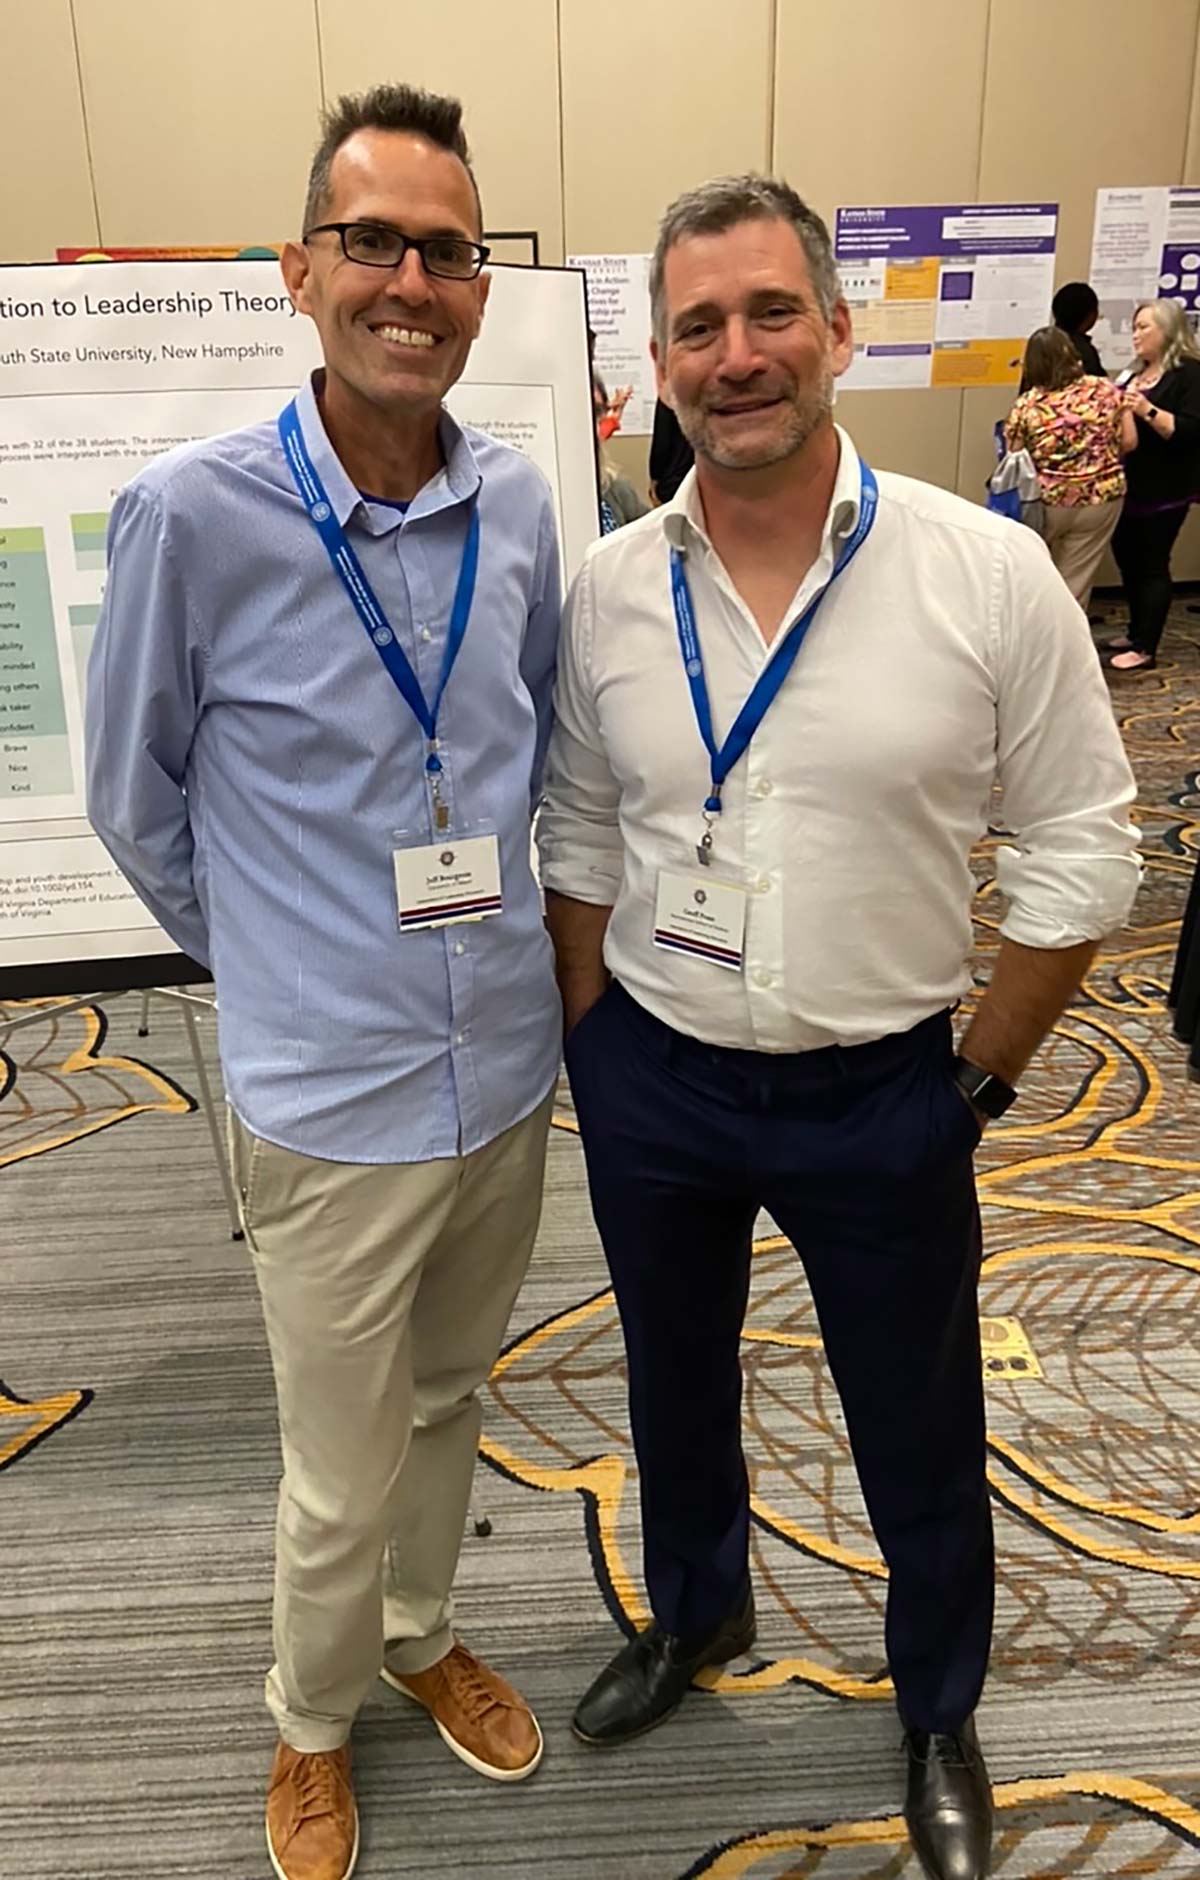 Jeff Bourgeois ’95 (on left) and Geoff Peate ’15G crossed paths at the 2022 Association of Leadership Educators in Kansas City, MO.